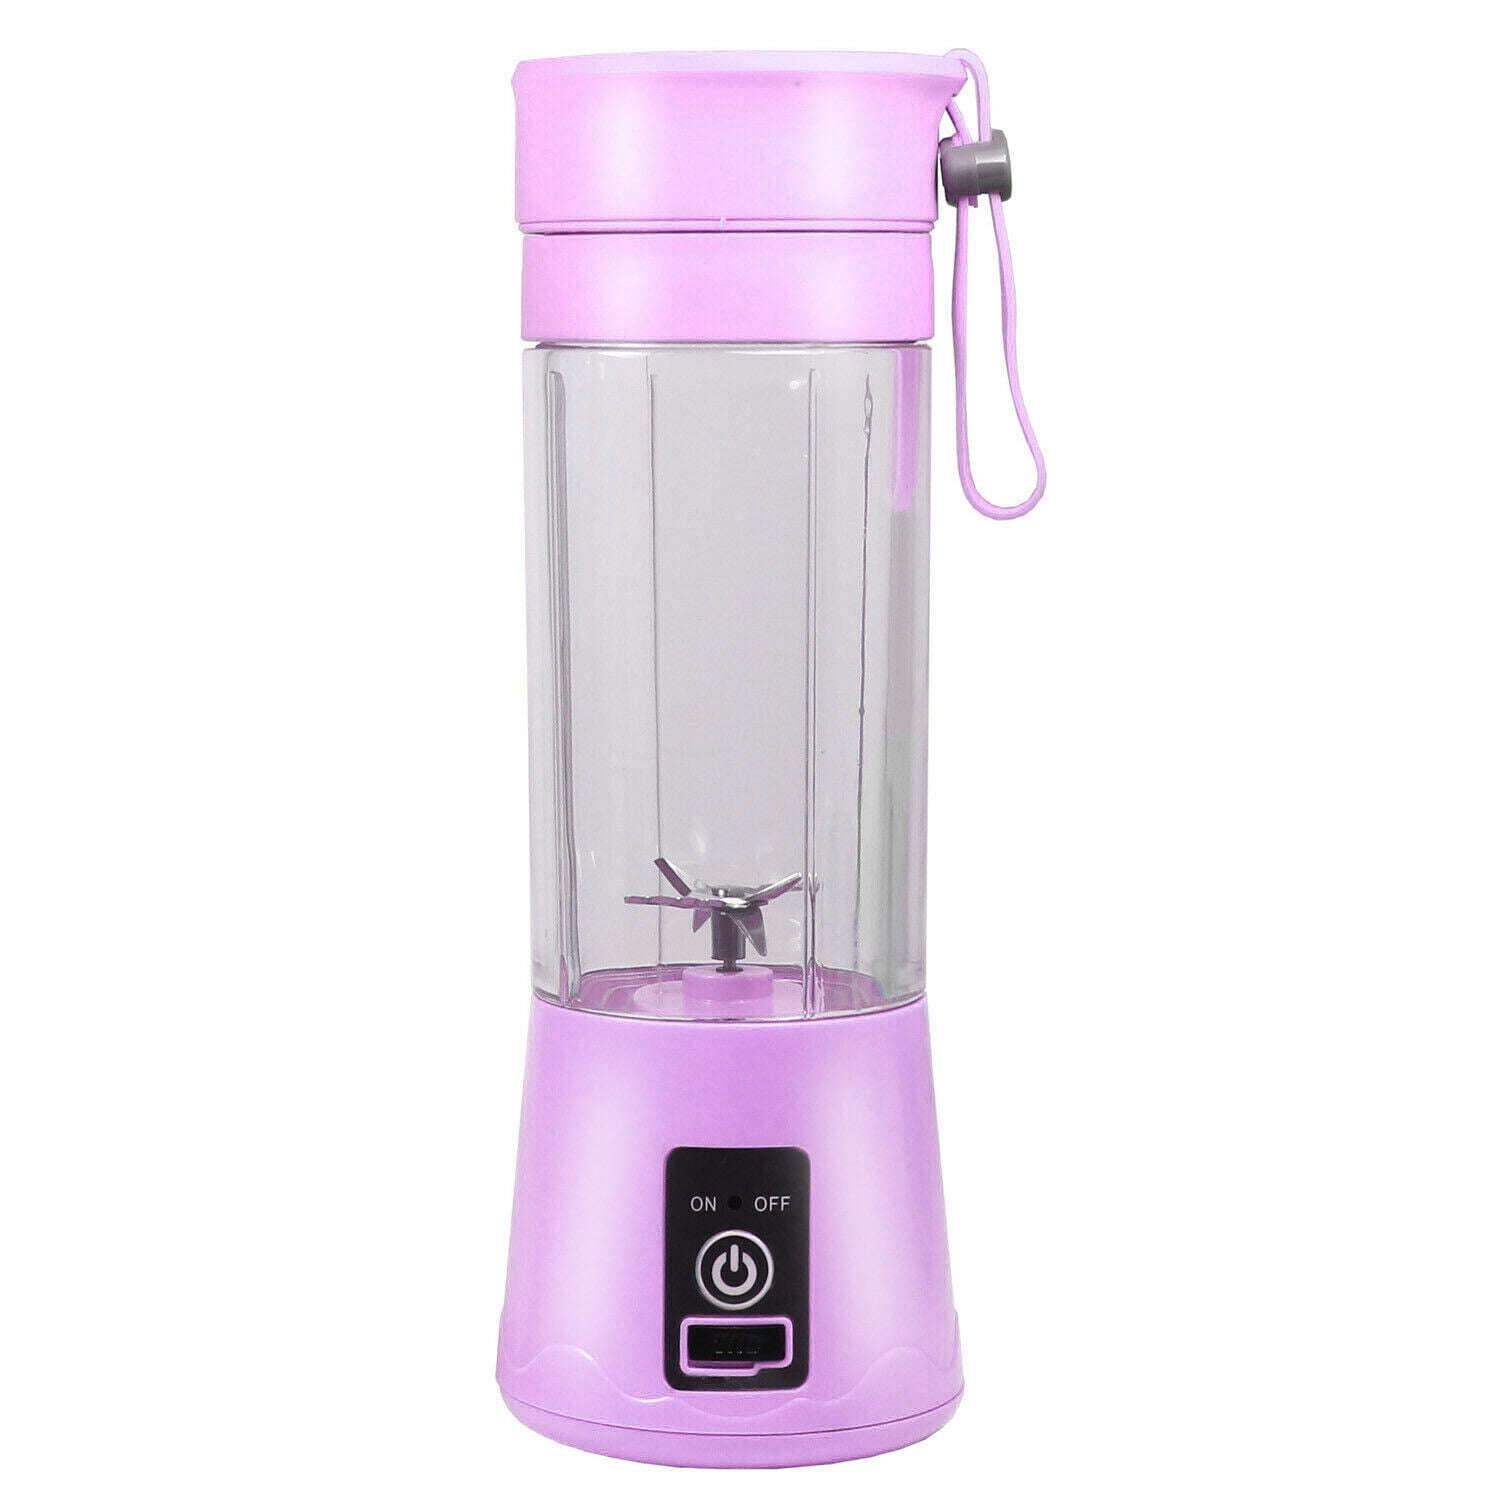 Zulay Kitchen Portable Blenders for Shakes and Smoothies 13 fl oz/380ml -  Blue 